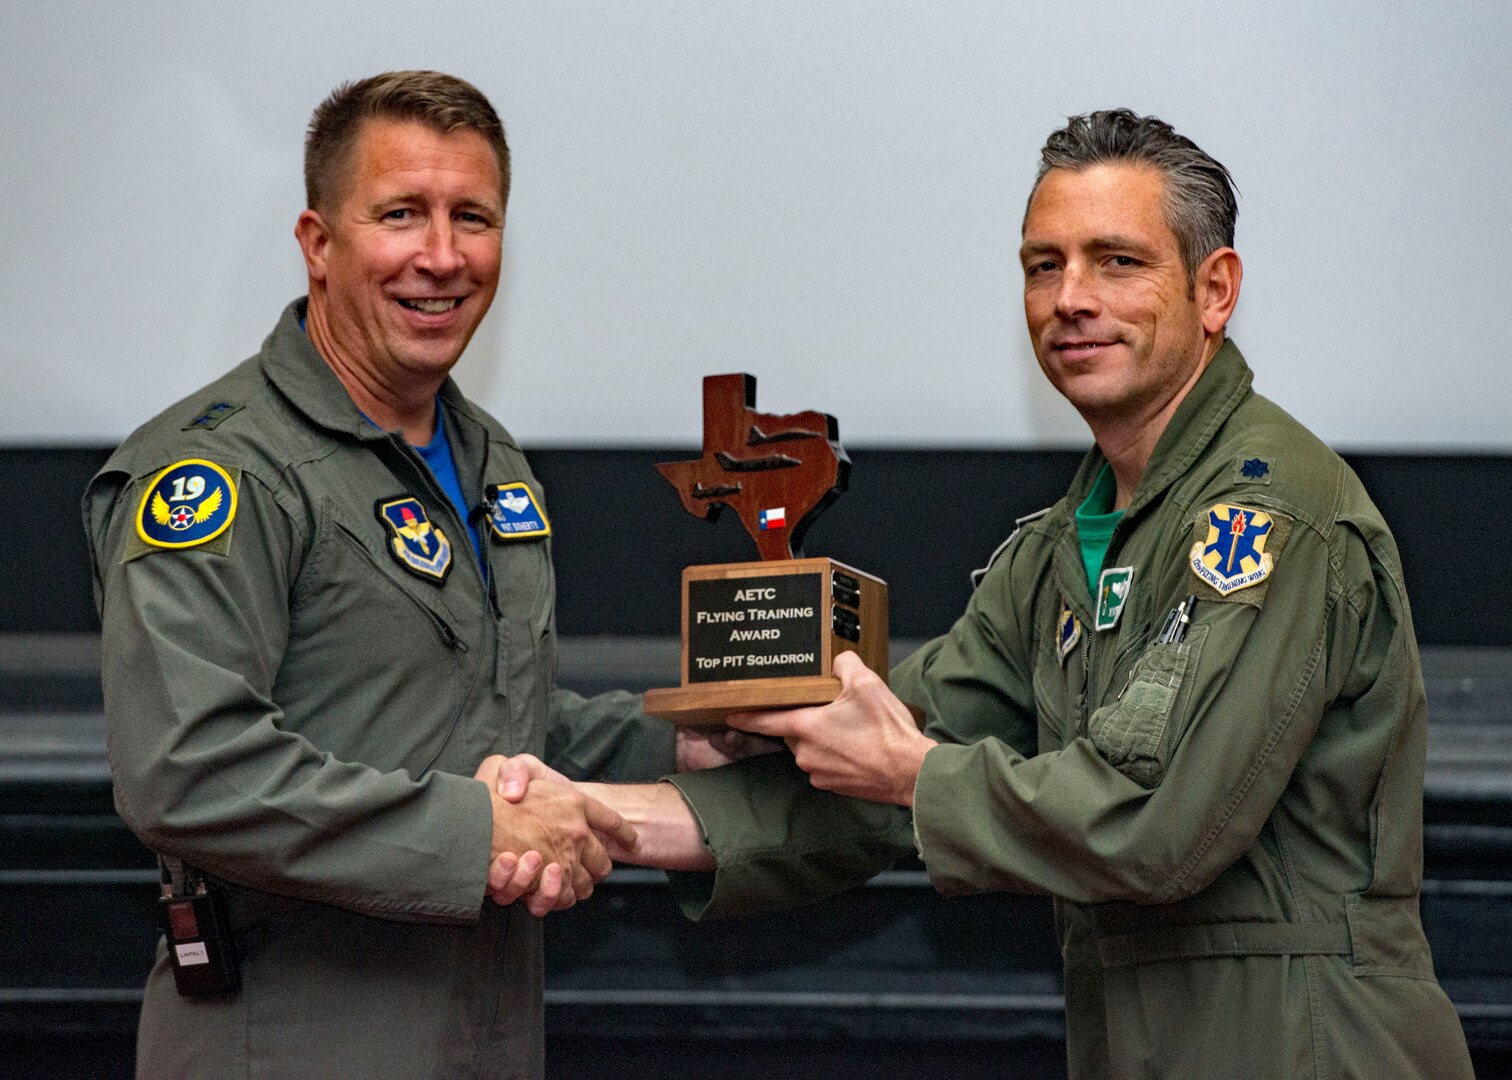 Maj. Gen. Patrick Doherty, 19th Air Force commander, presents the Top Pilot Instructor Training Squadron Award to the 560th Flying Training Squadron, during the Air Education and Training Command Flying Training Awards Ceremony Oct. 26, 2018, at Joint Base San Antonio-Randolph, Texas. The award ceremony recognizes individuals, squadrons, groups and wings whose efforts have led to the highest levels of student production.